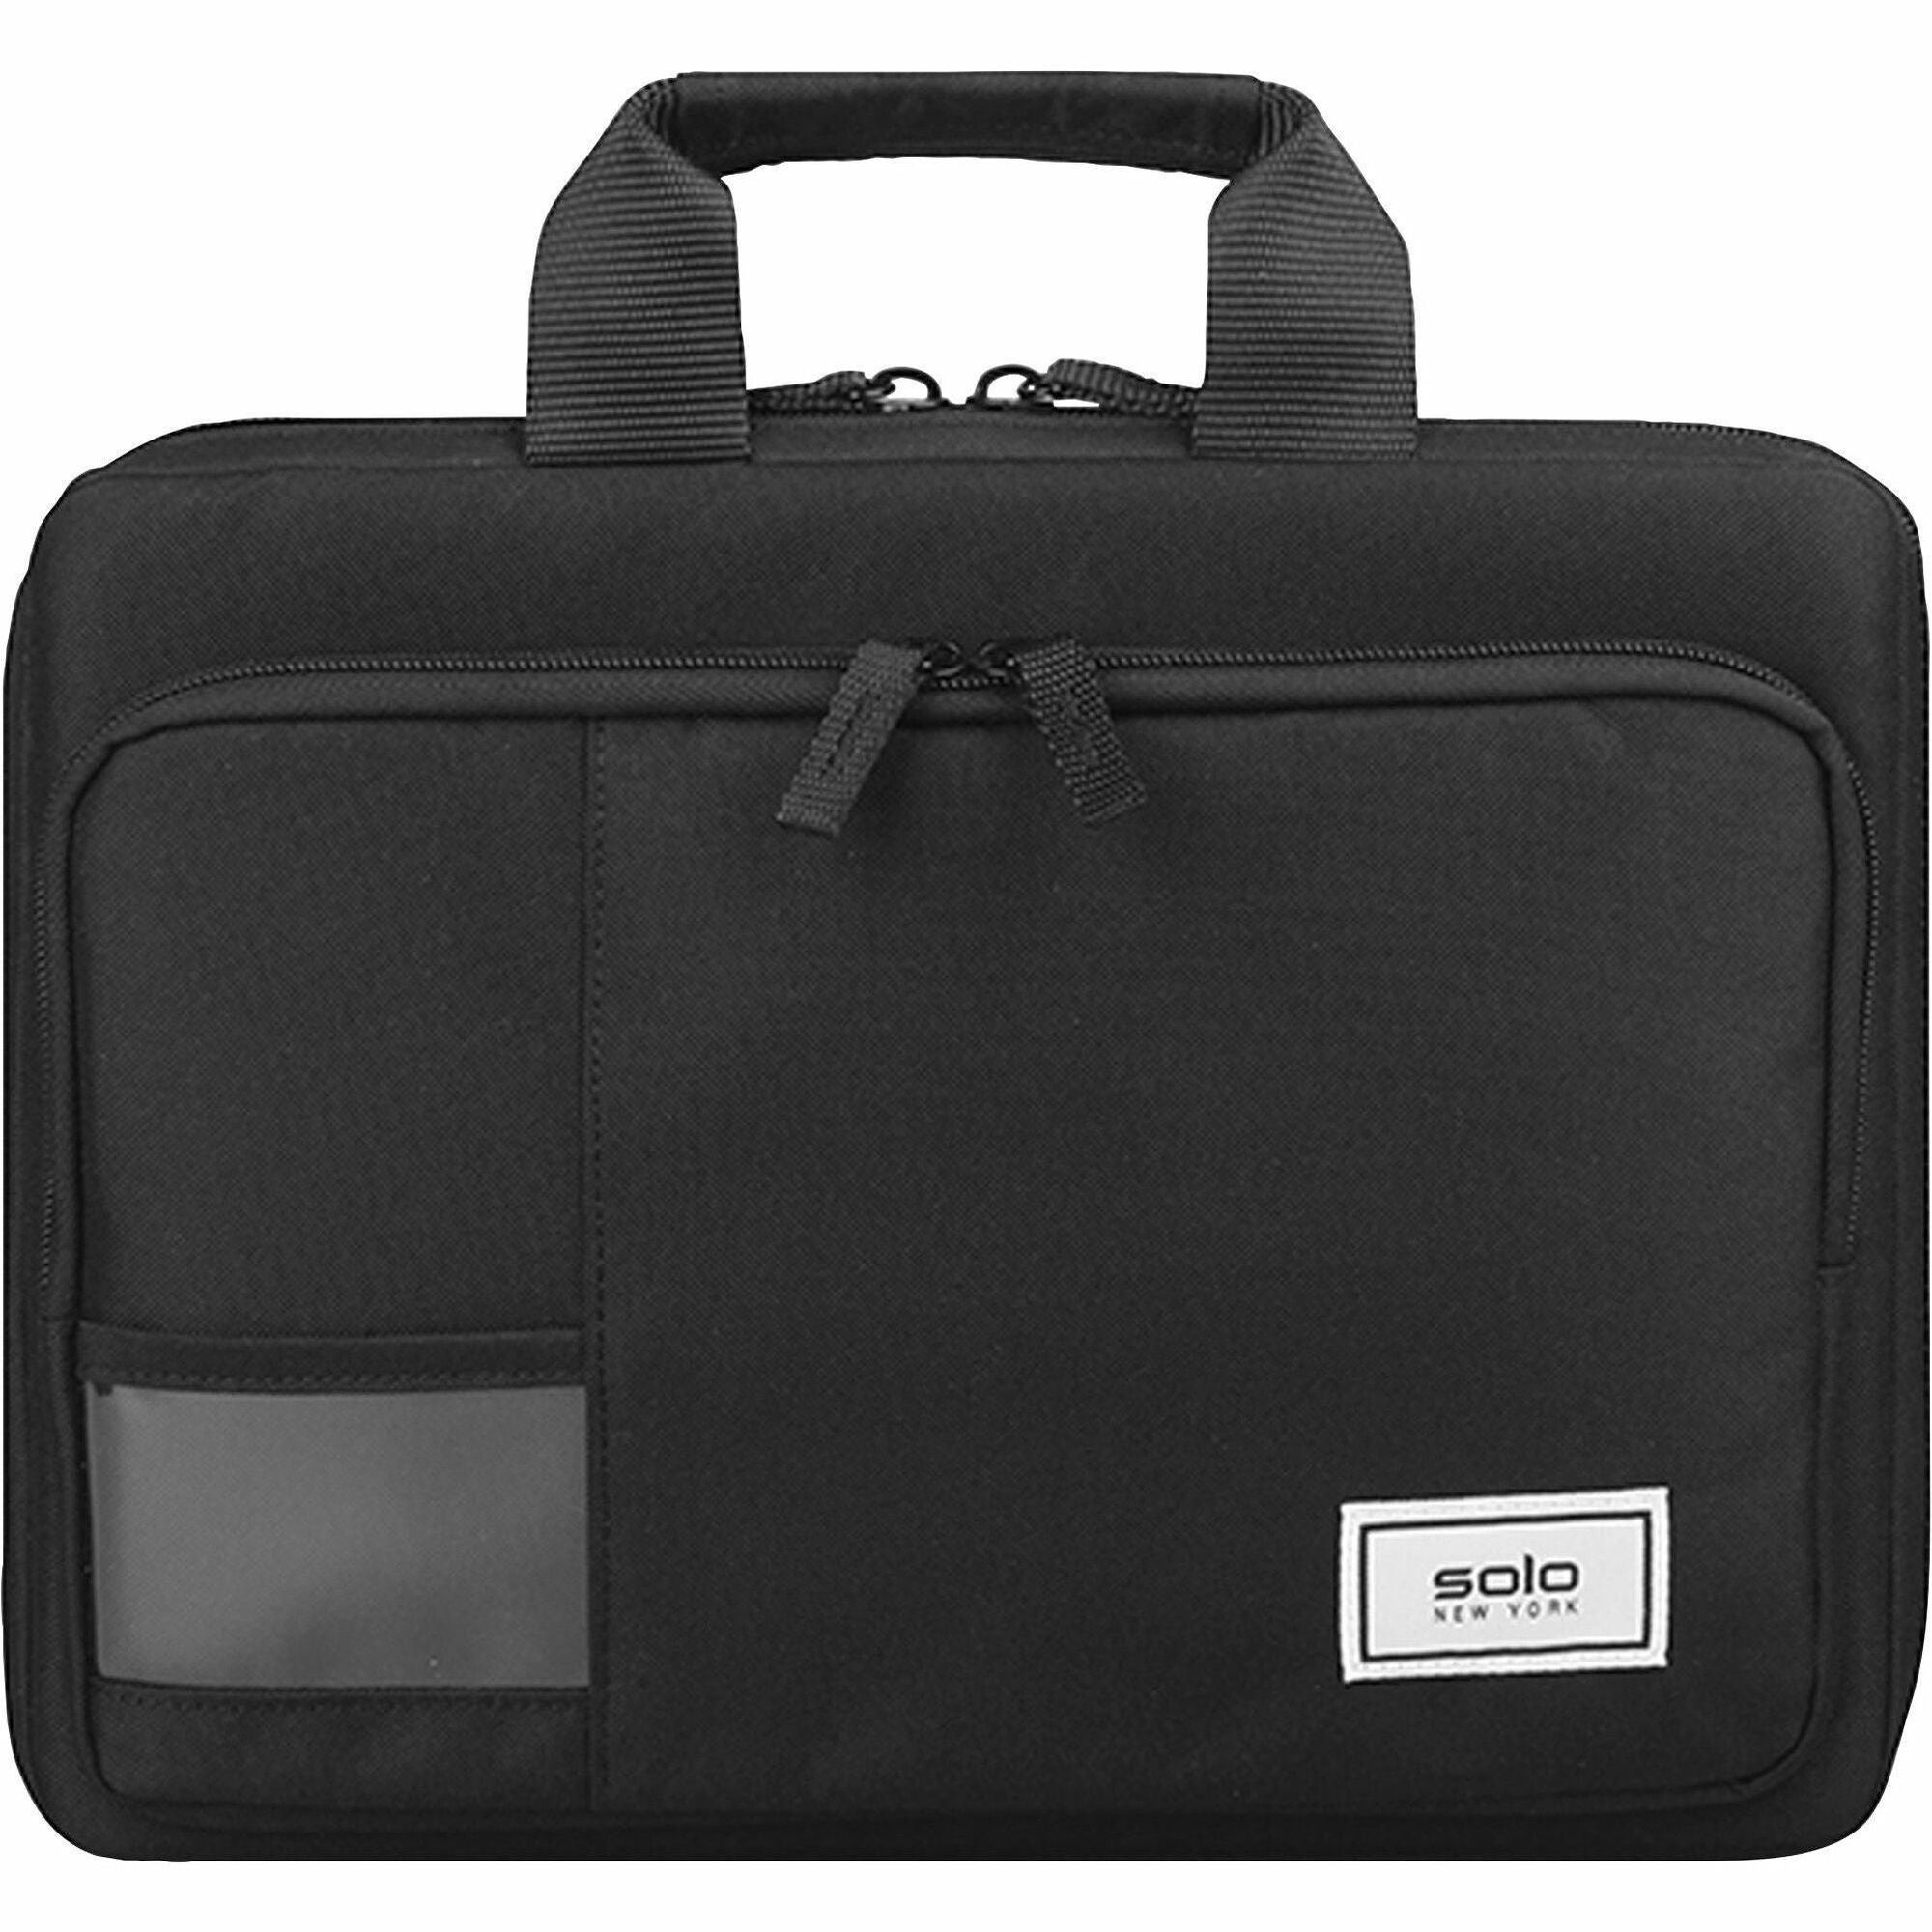 solo-carrying-case-for-133-chromebook-notebook-black-drop-resistant-bacterial-resistant-water-resistant-fabric-body-handle-1-each_uslpro1514 - 1